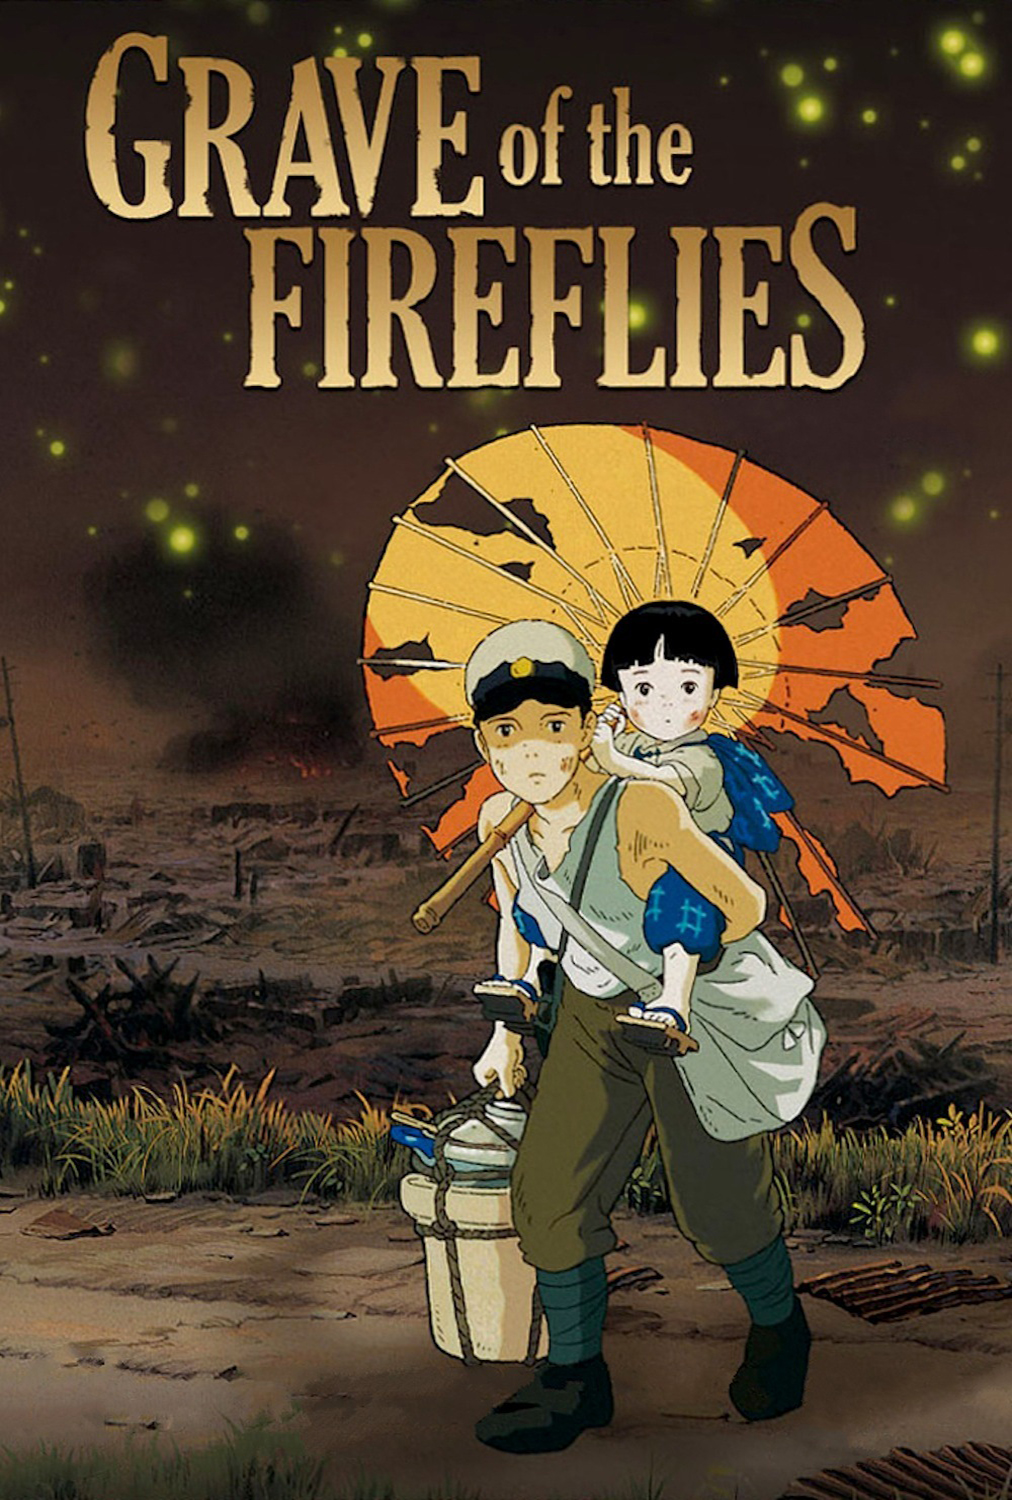 HD wallpaper: Grave of the Fireflies, animated movies, anime, animation,  film stills | Wallpaper Flare